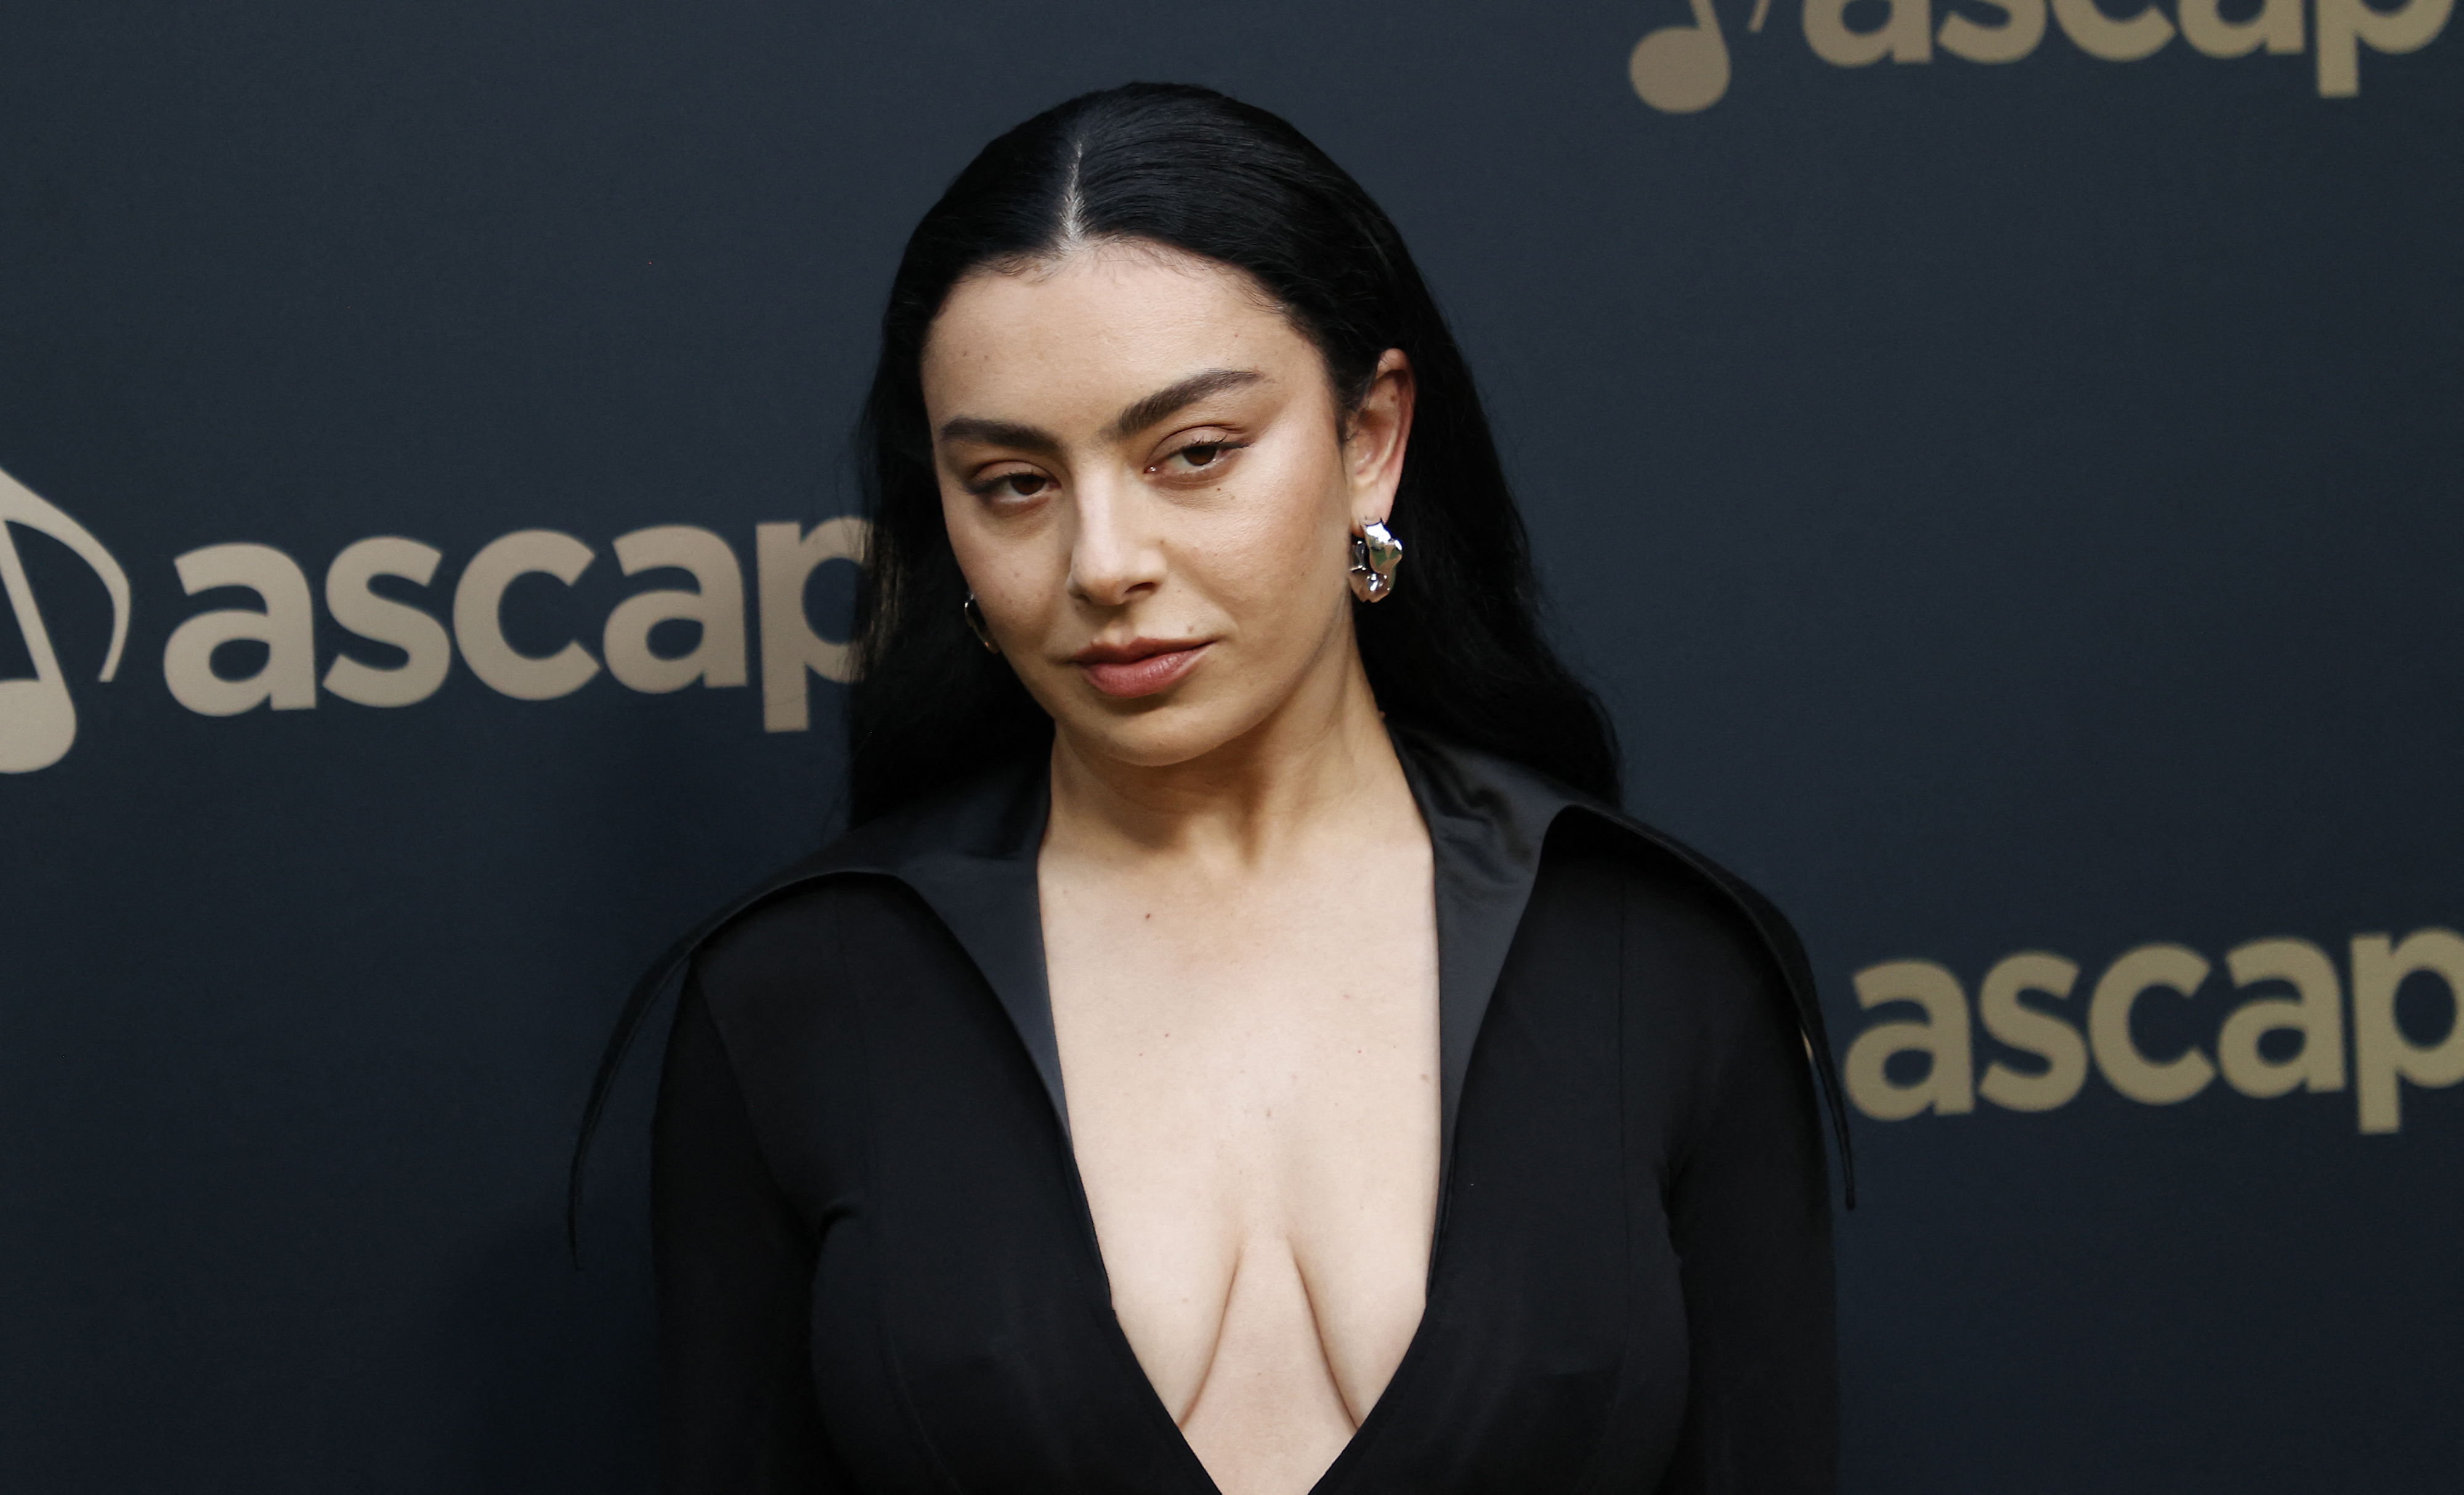 Charli XCX at an ASCAP event, wearing a plunging black dress with long sleeves